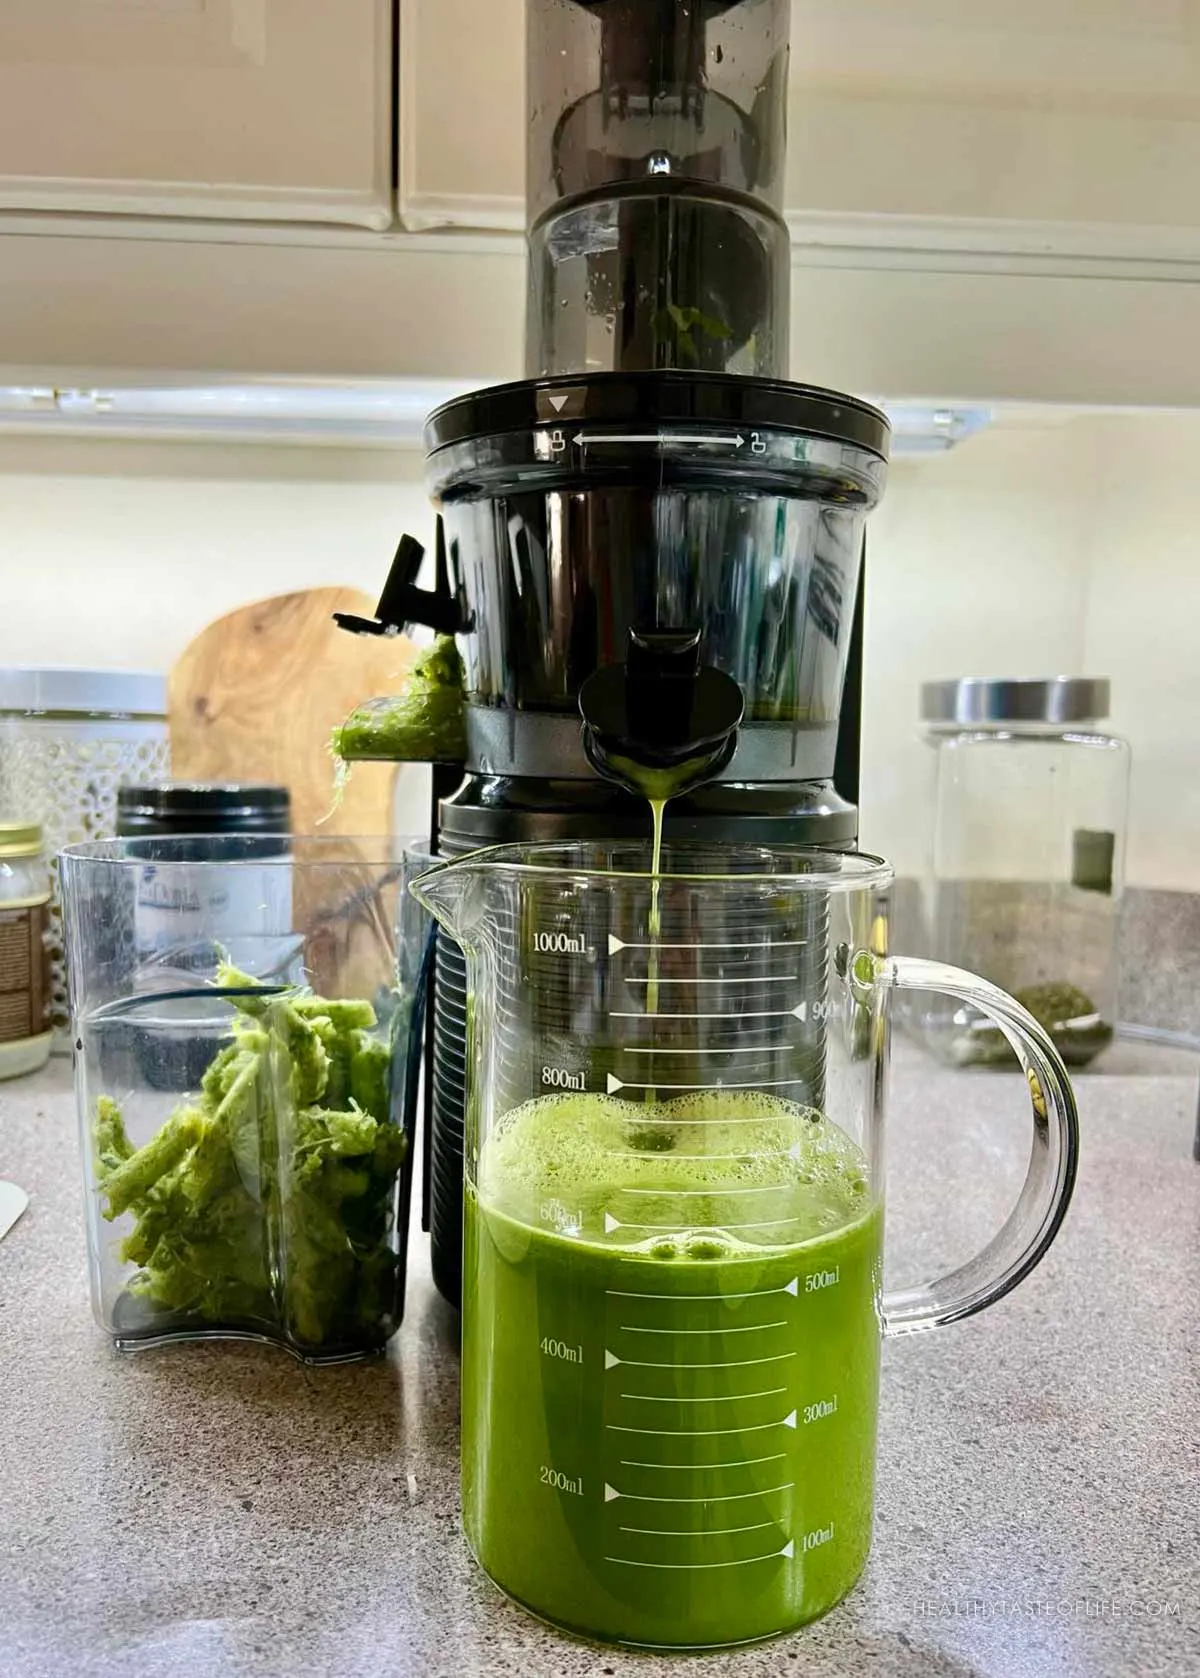 Juicing pineapple and celery in a juicer - photo showing the process.